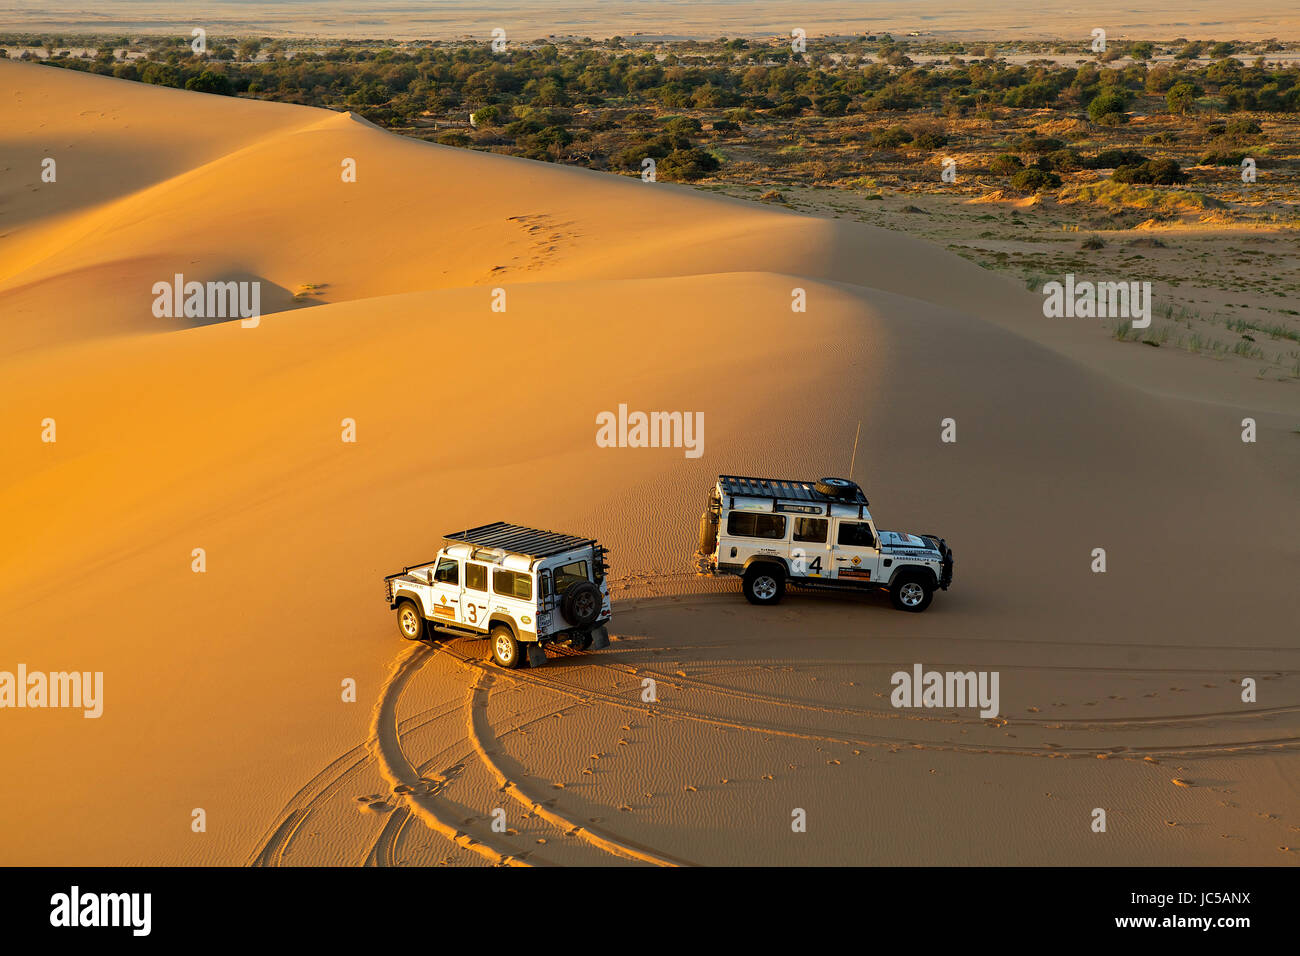 Two offroad vehicles parked on African dunes Stock Photo